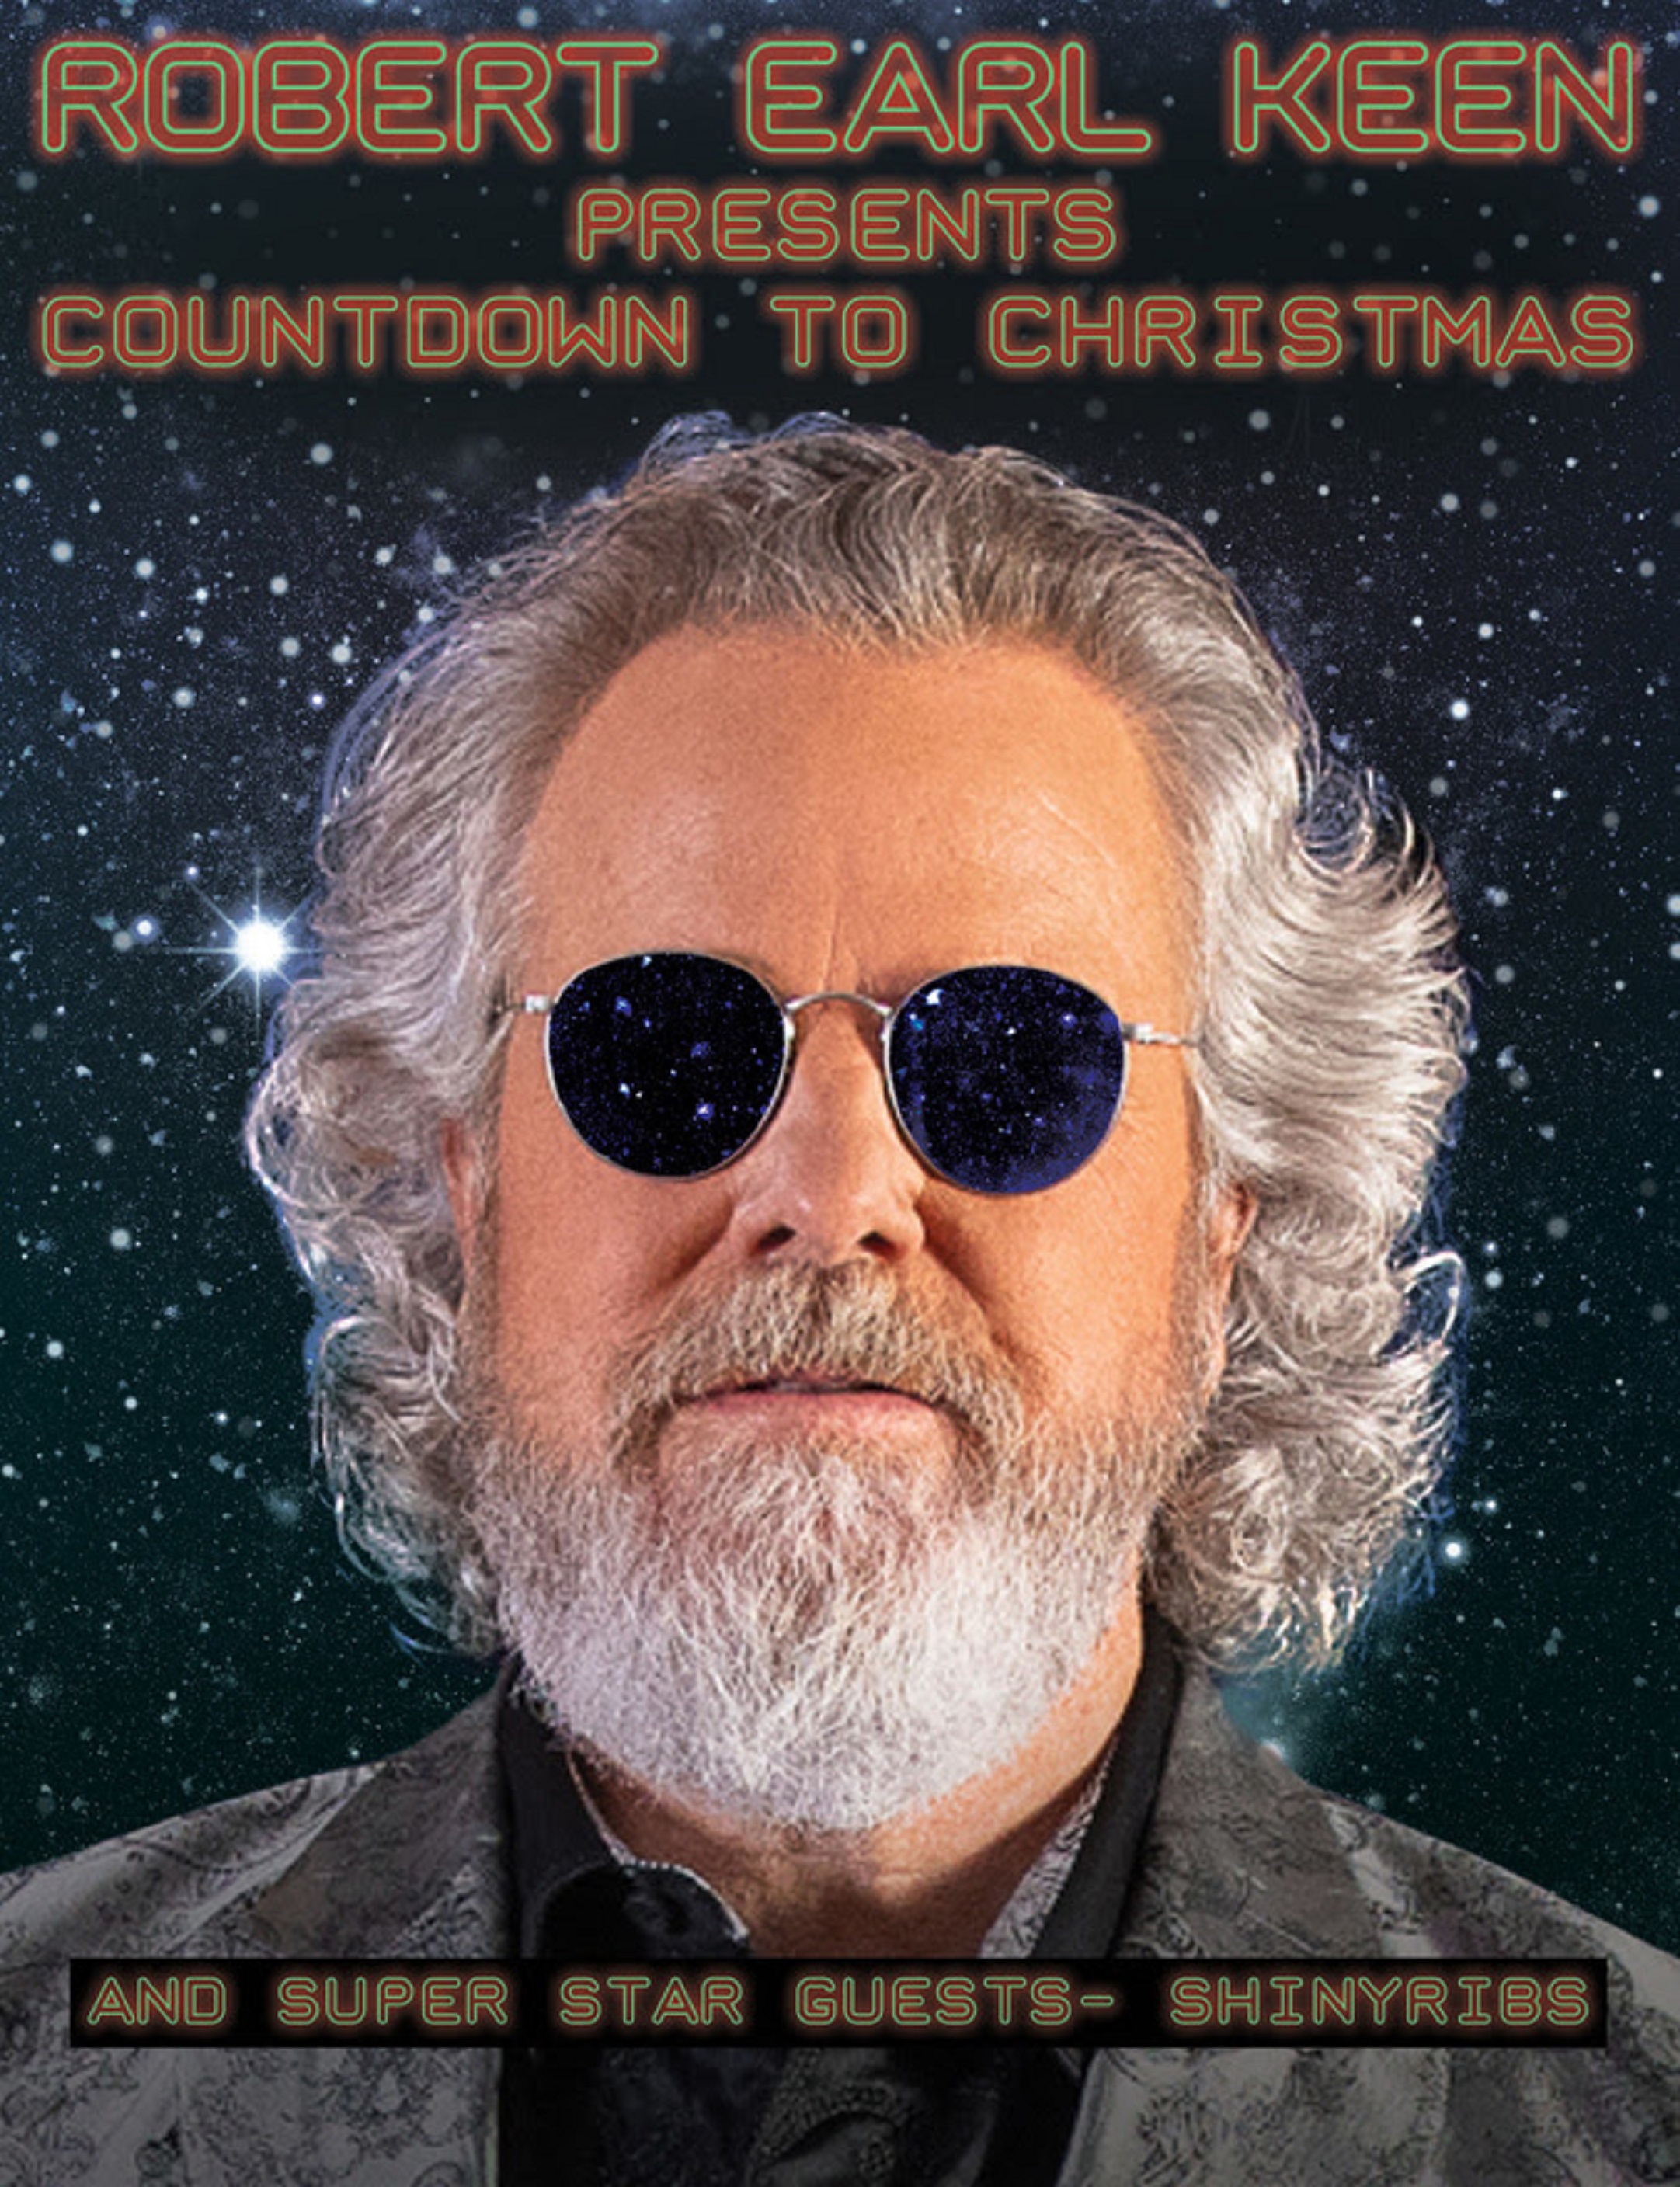 Robert Earl Keen Celebrates Christmas to the Moon and Back